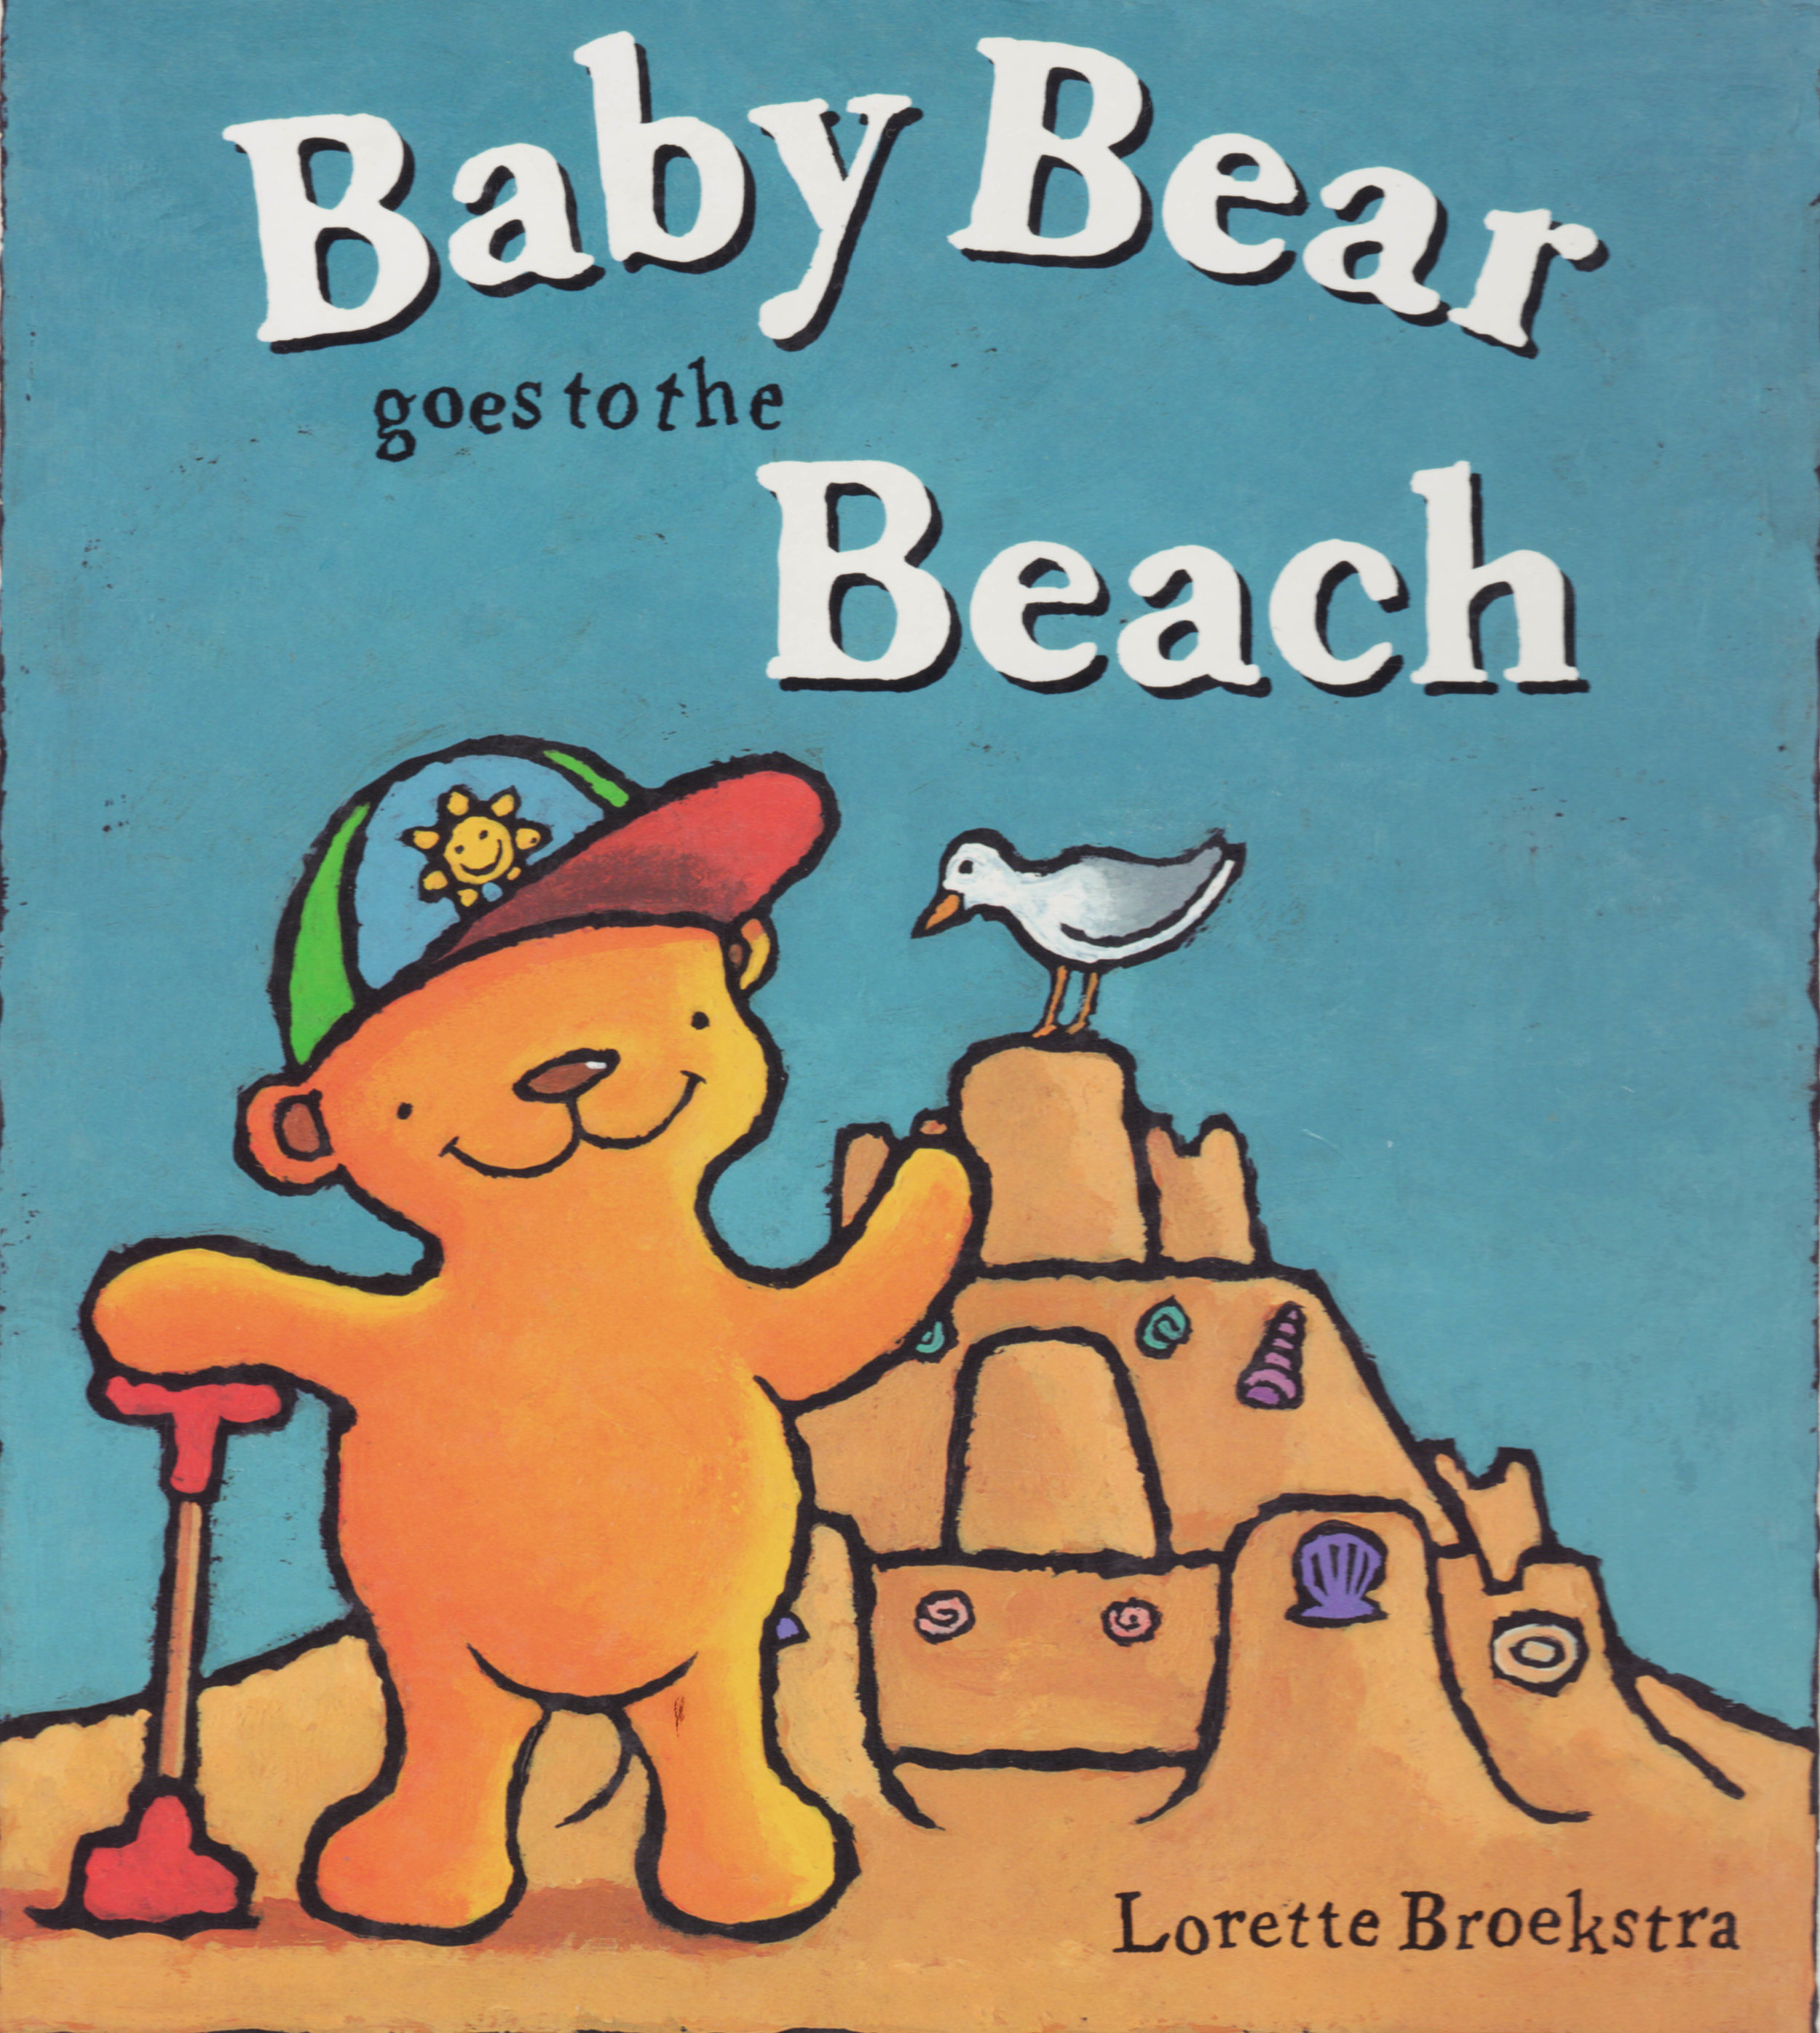 Baby Bear goes to the Beach